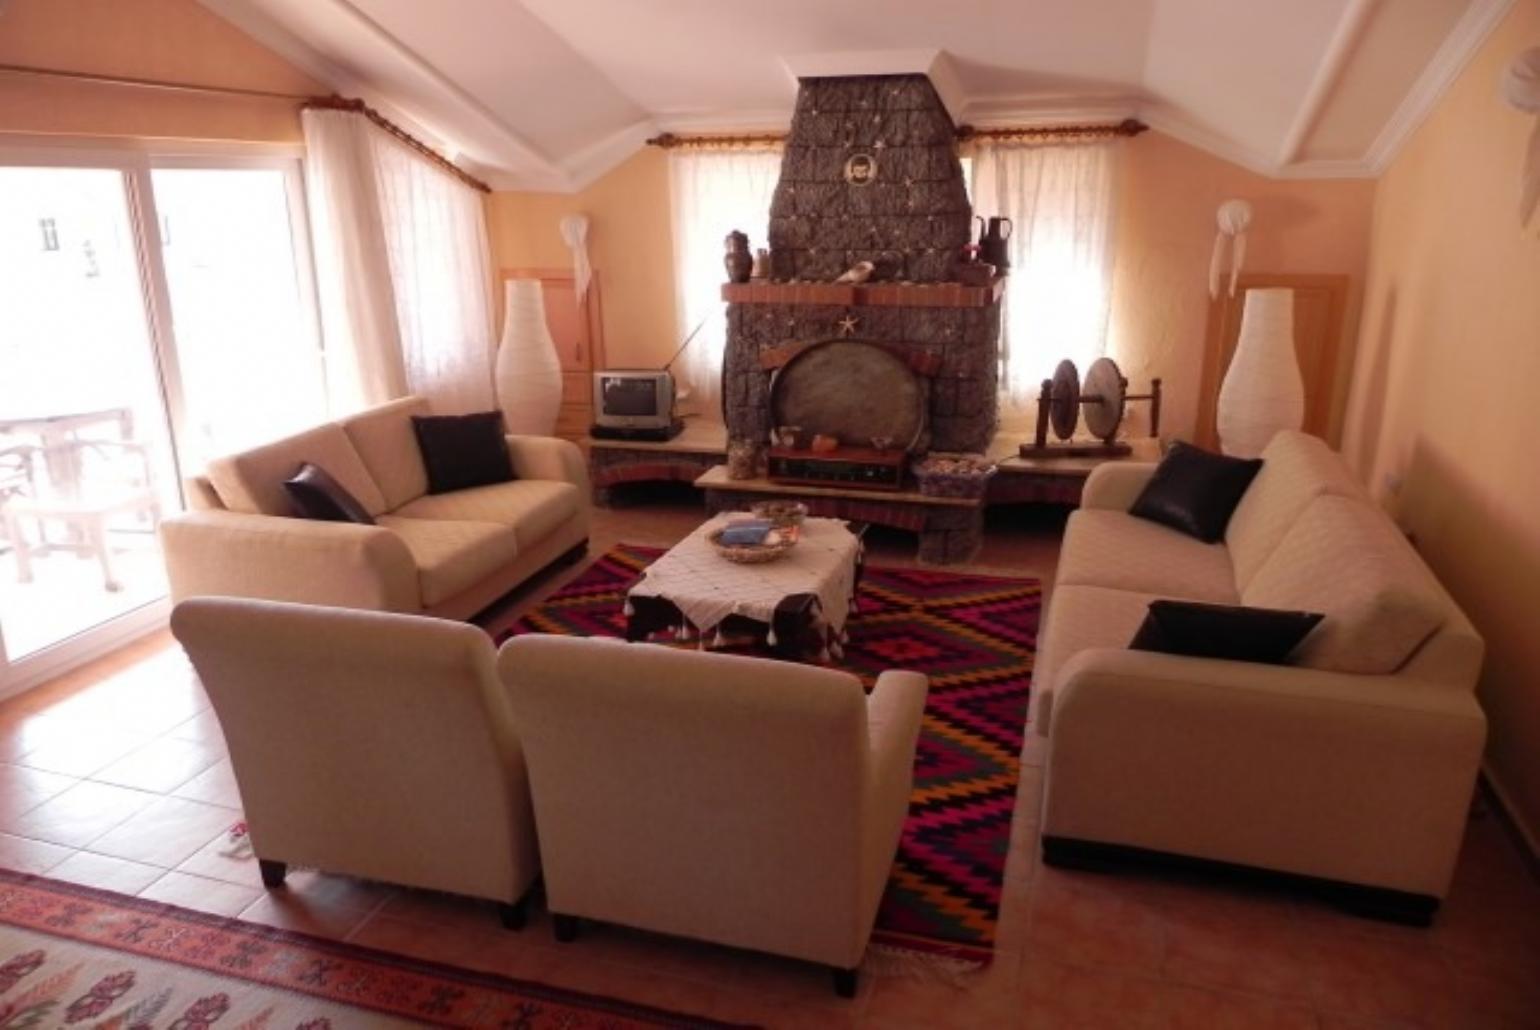 Living room with ornamental fireplace